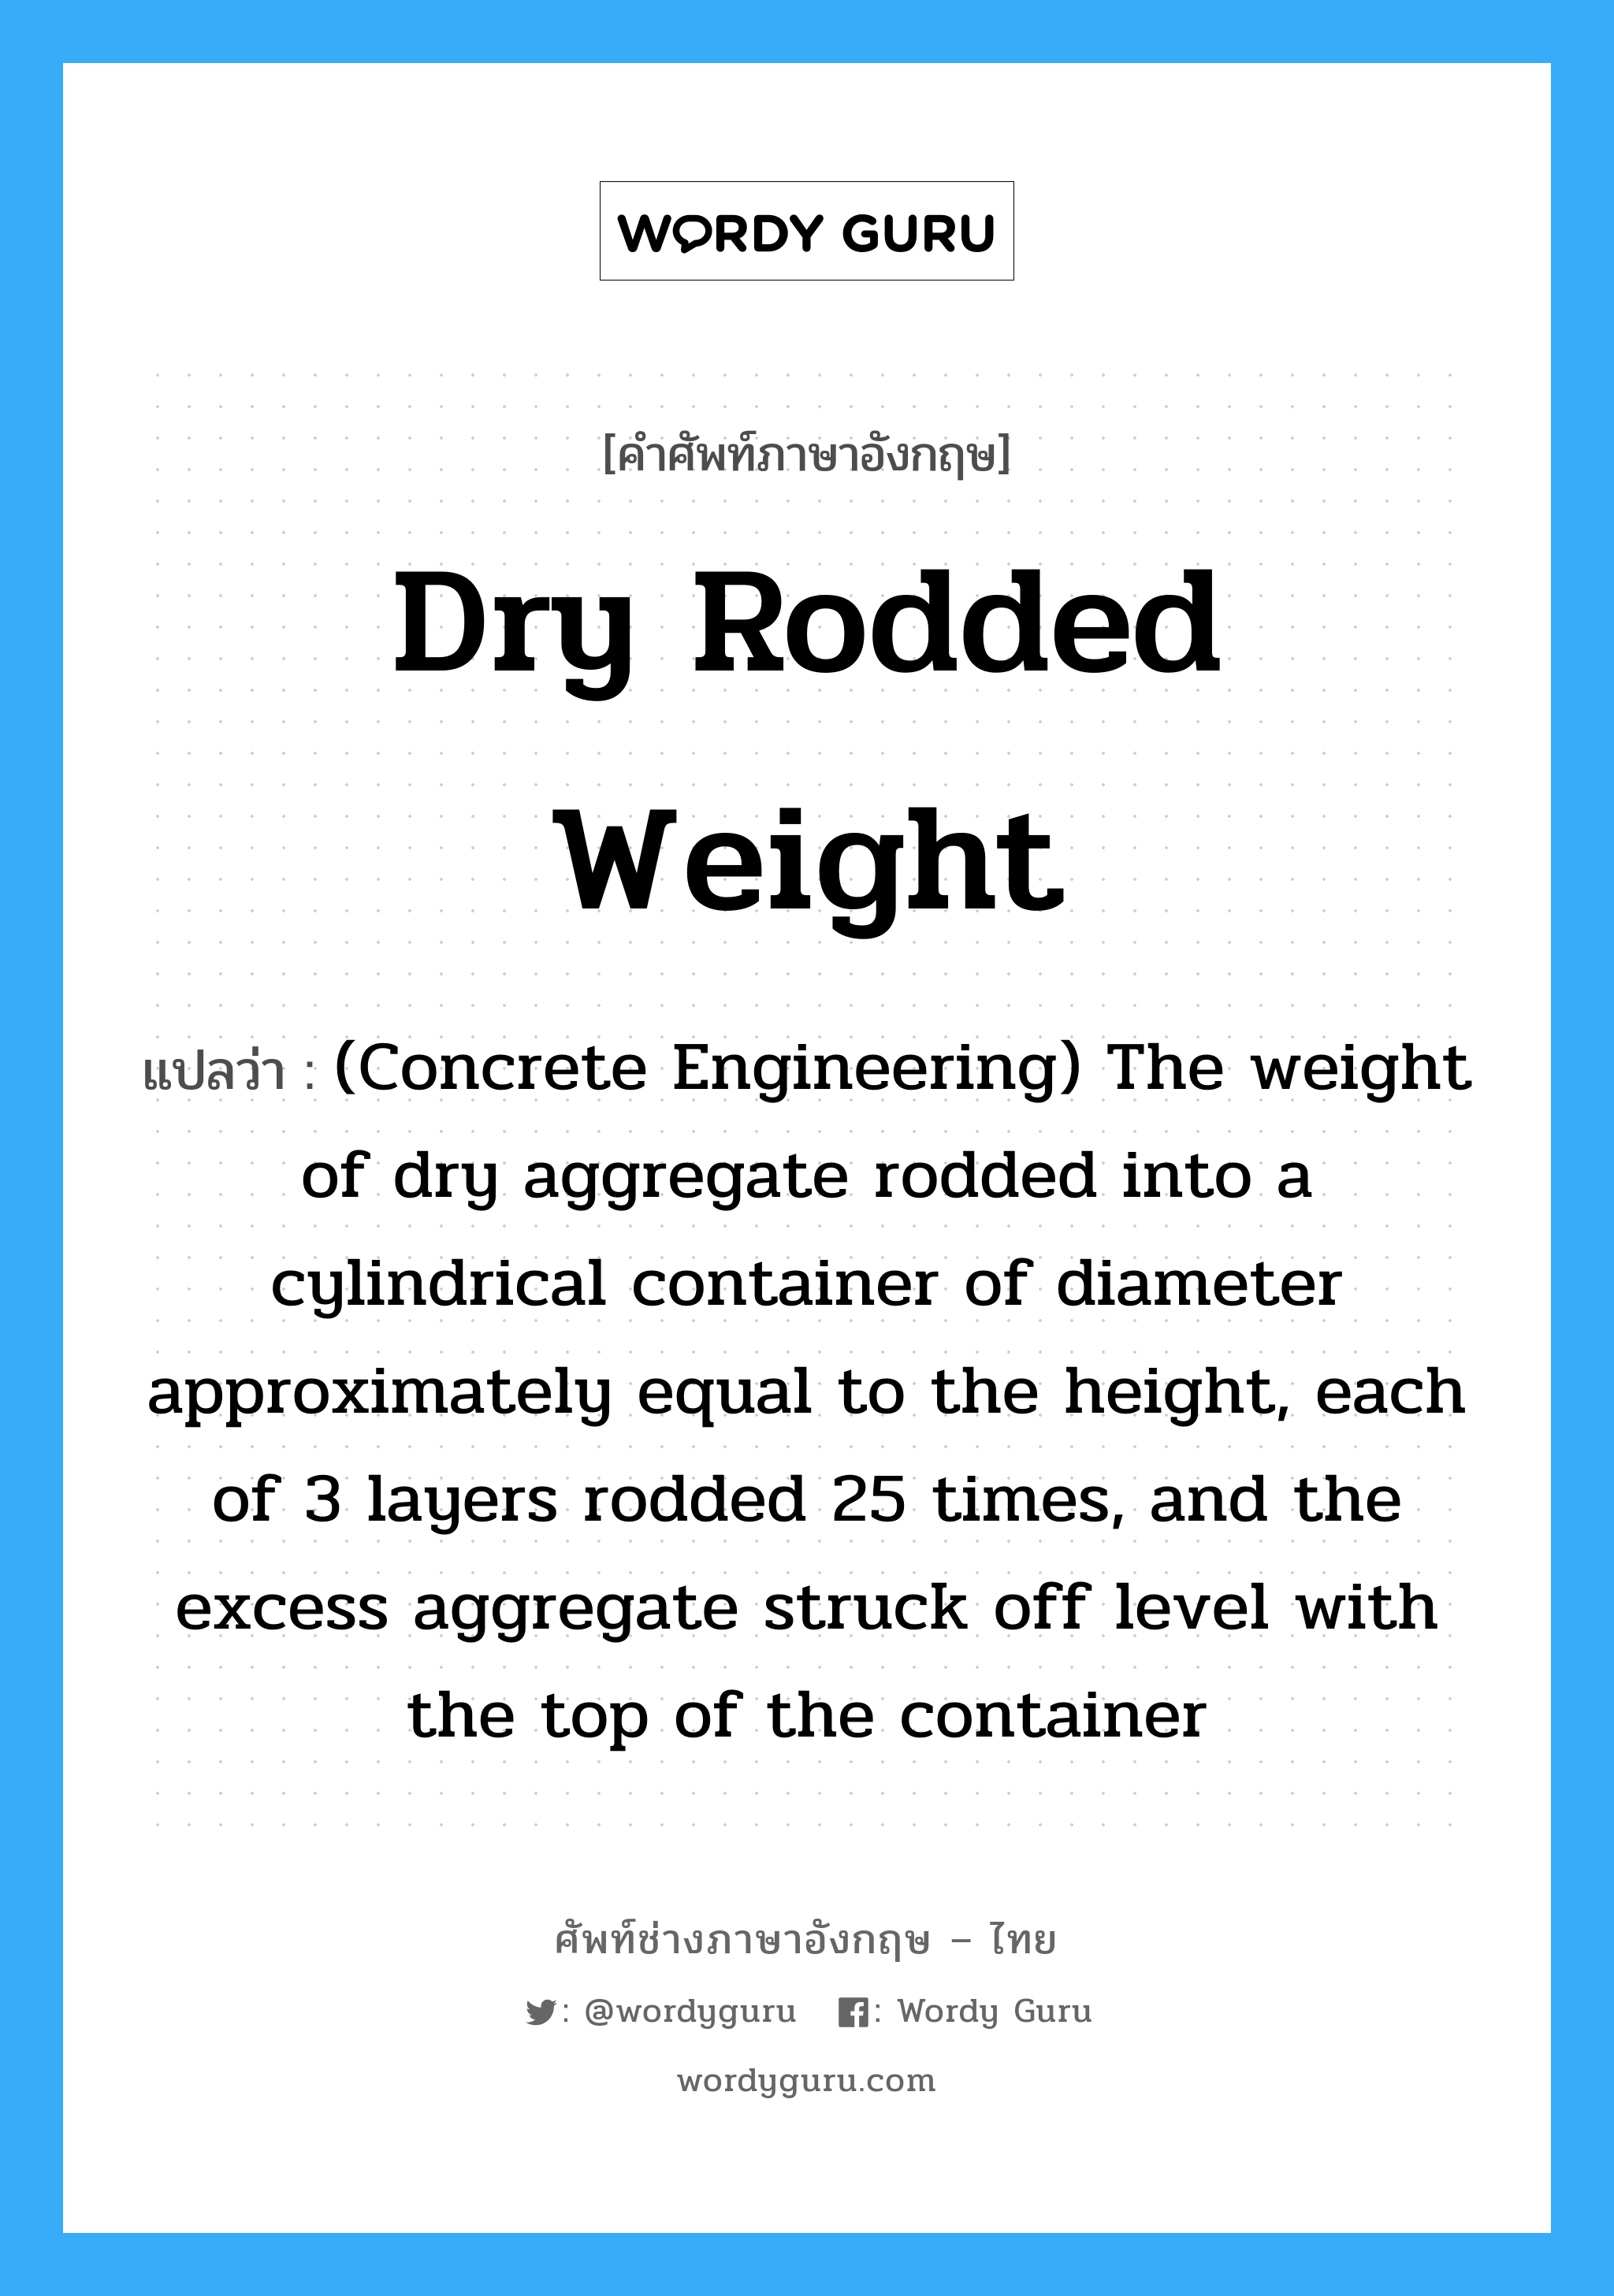 Dry Rodded Weight แปลว่า?, คำศัพท์ช่างภาษาอังกฤษ - ไทย Dry Rodded Weight คำศัพท์ภาษาอังกฤษ Dry Rodded Weight แปลว่า (Concrete Engineering) The weight of dry aggregate rodded into a cylindrical container of diameter approximately equal to the height, each of 3 layers rodded 25 times, and the excess aggregate struck off level with the top of the container